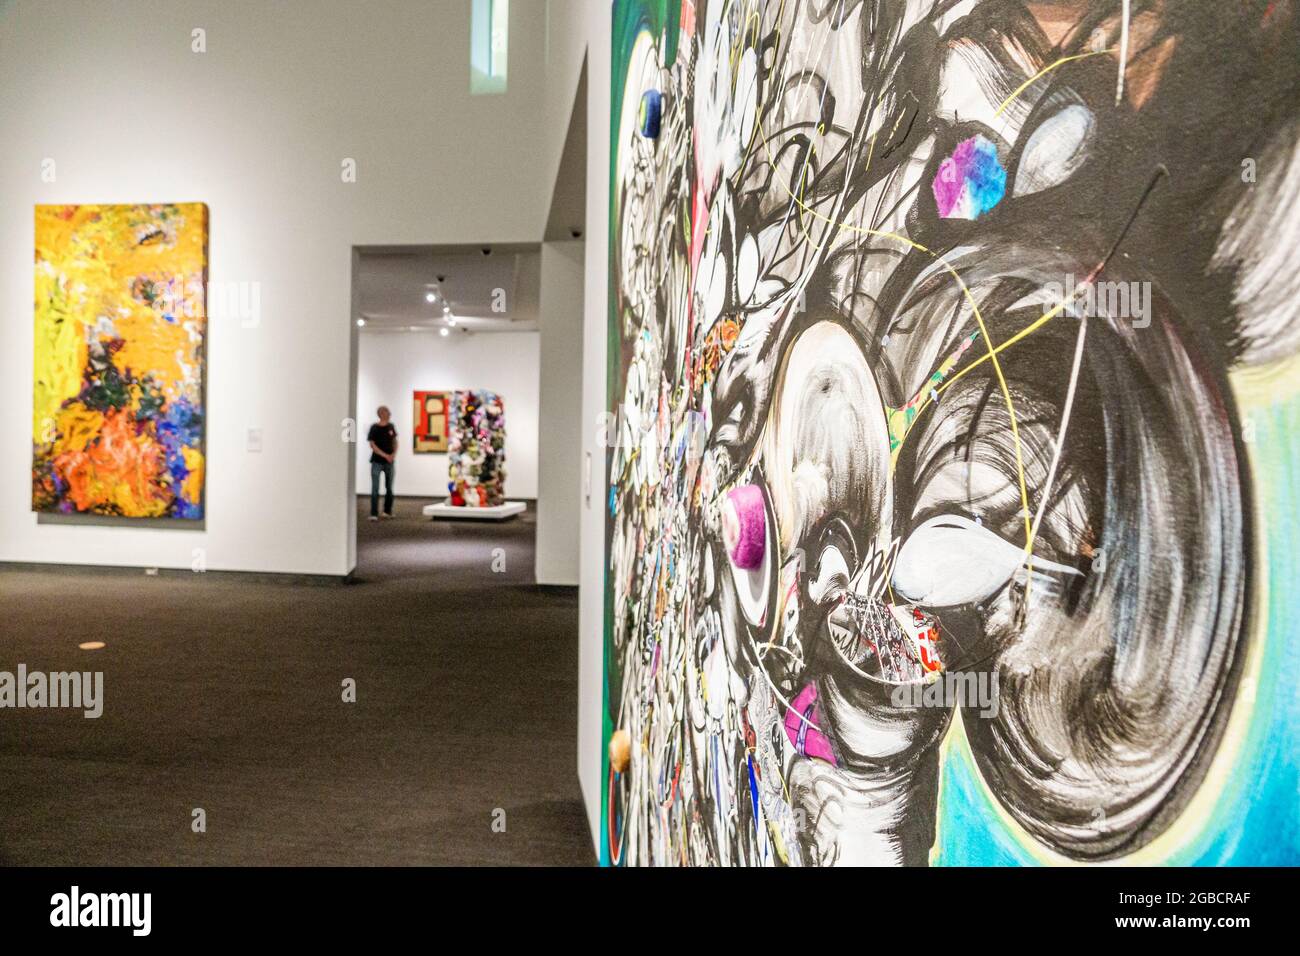 Florida St. Saint Petersburg Museum of Fine Arts interior inside,gallery paintings Shinique Smith Whirlwind Dancer artist painter, Stock Photo